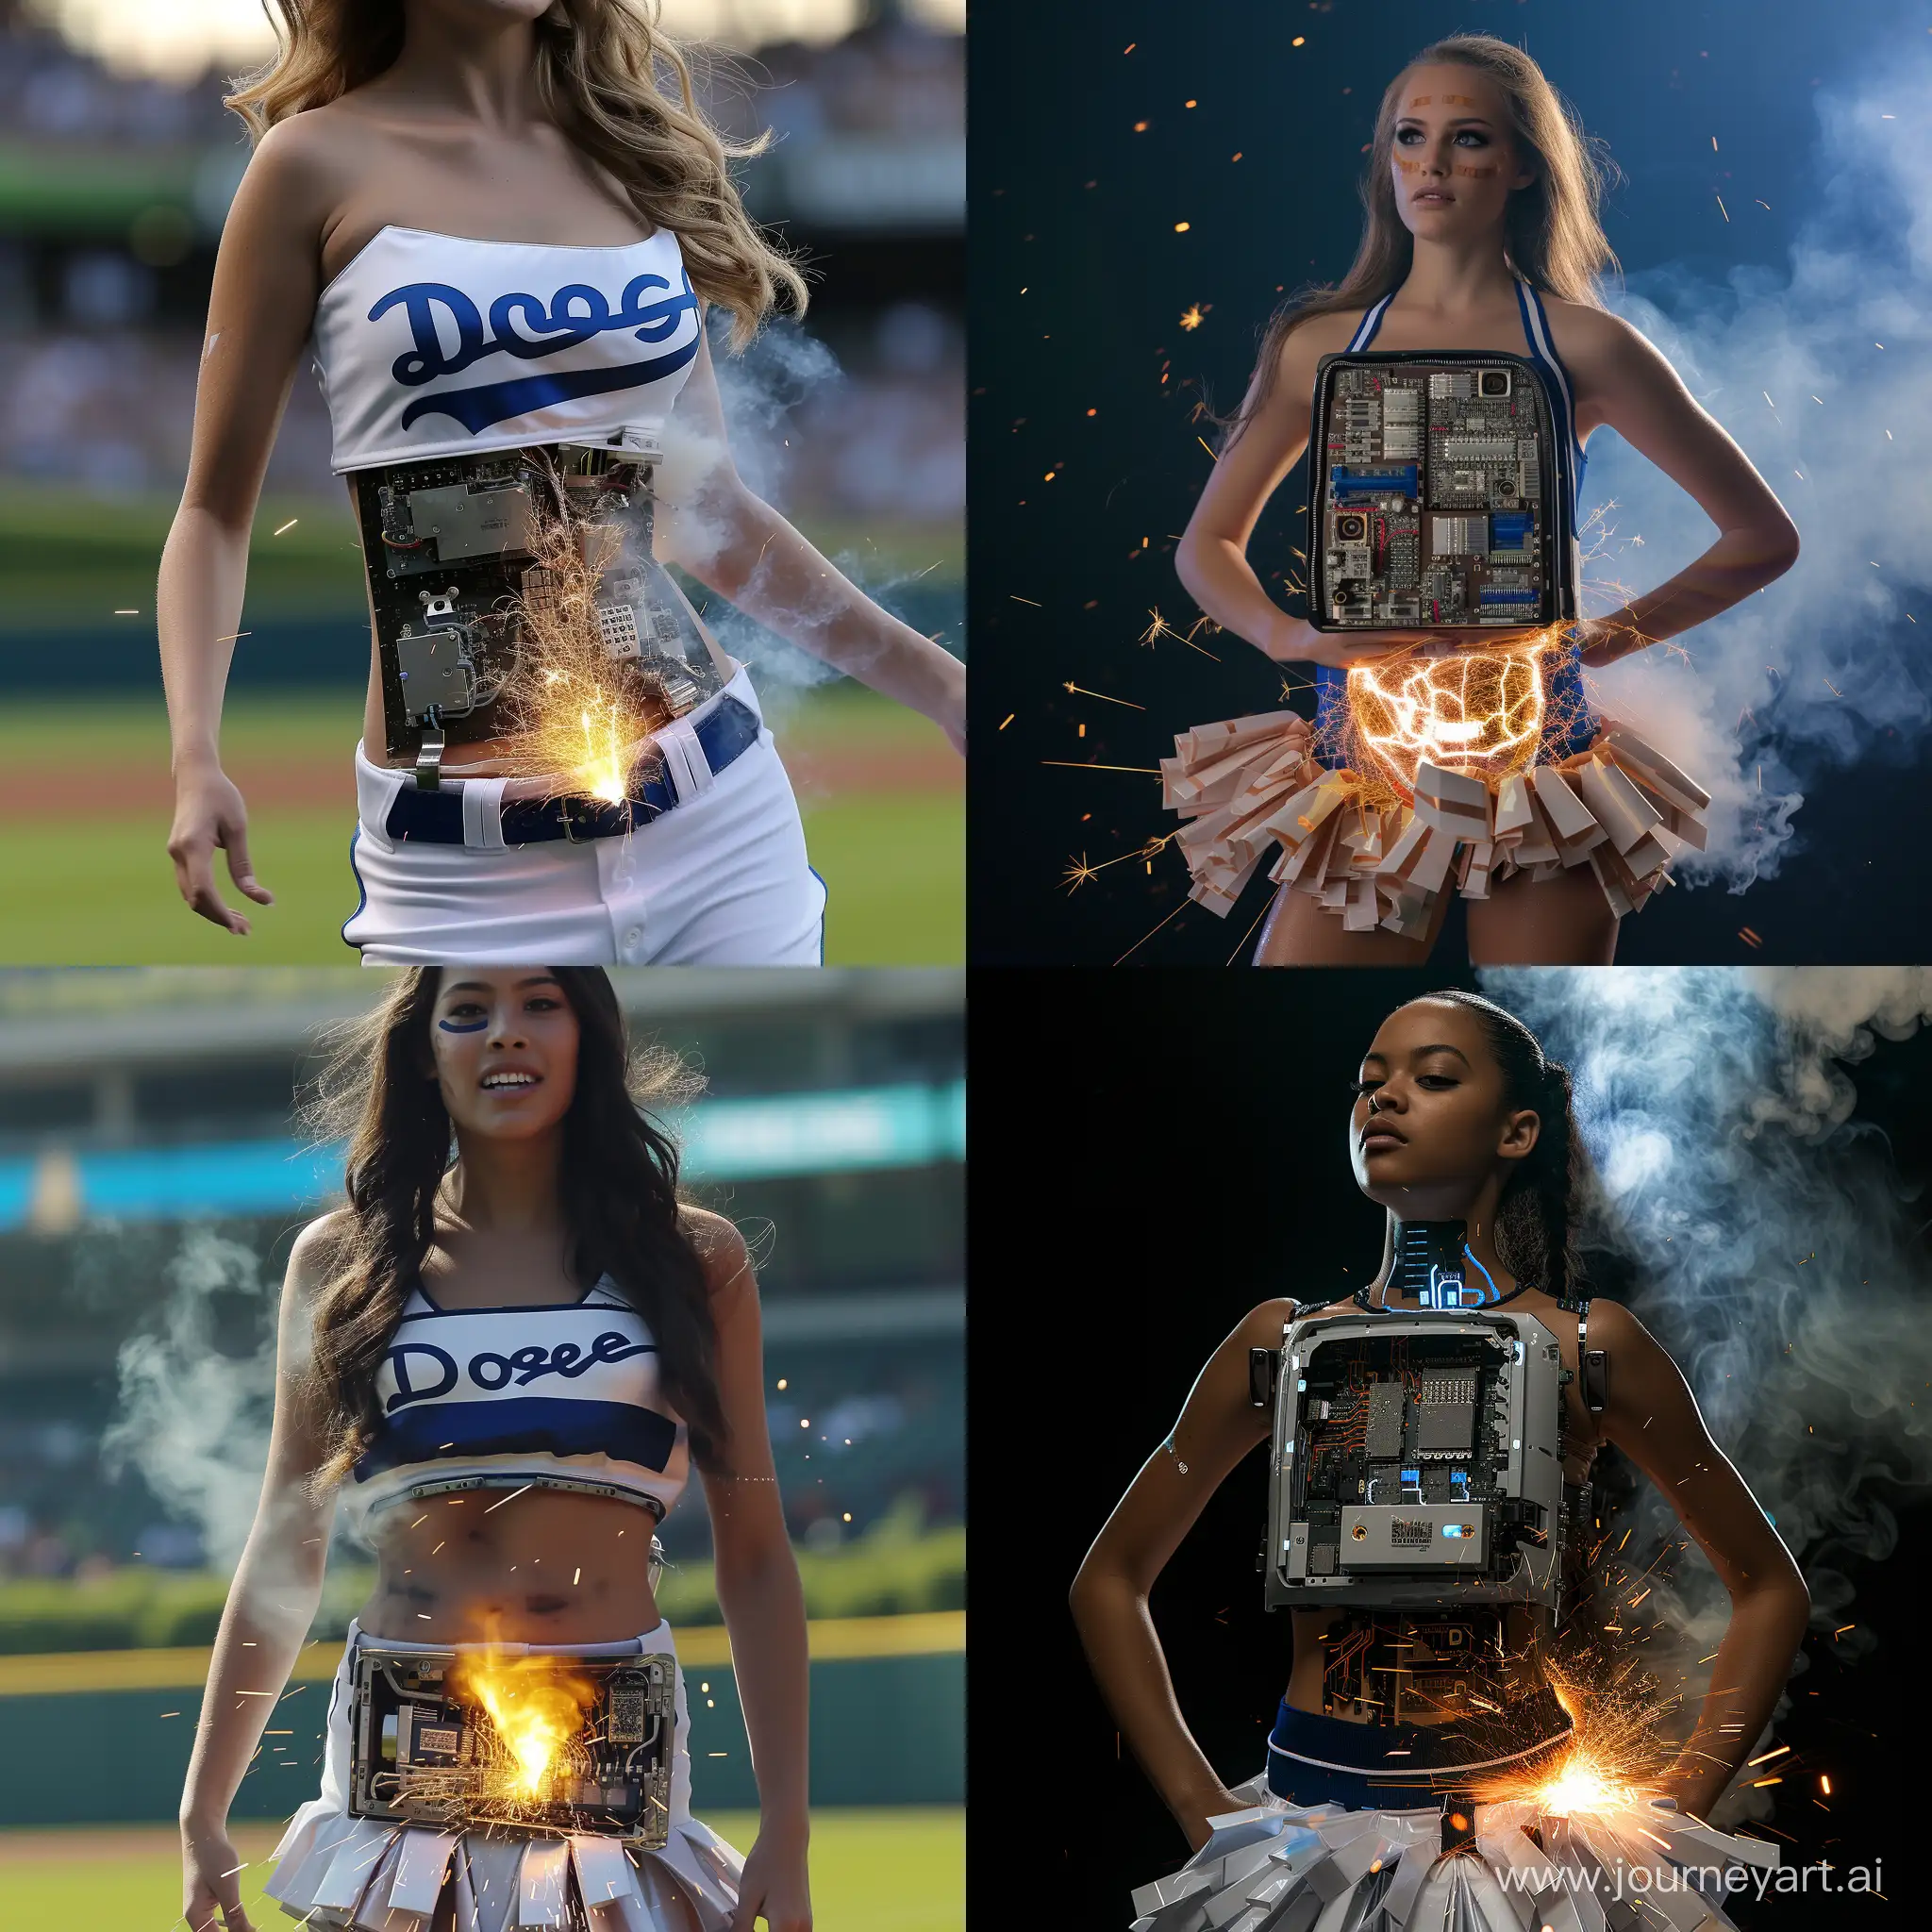 Los Angeles Dodgers 13-14 year old cheerleader, turns out to be a robot, malfunctioning, panel open on her stomach revealing inner circuits, smoke and sparks coming out of her, on the brink of shutting down